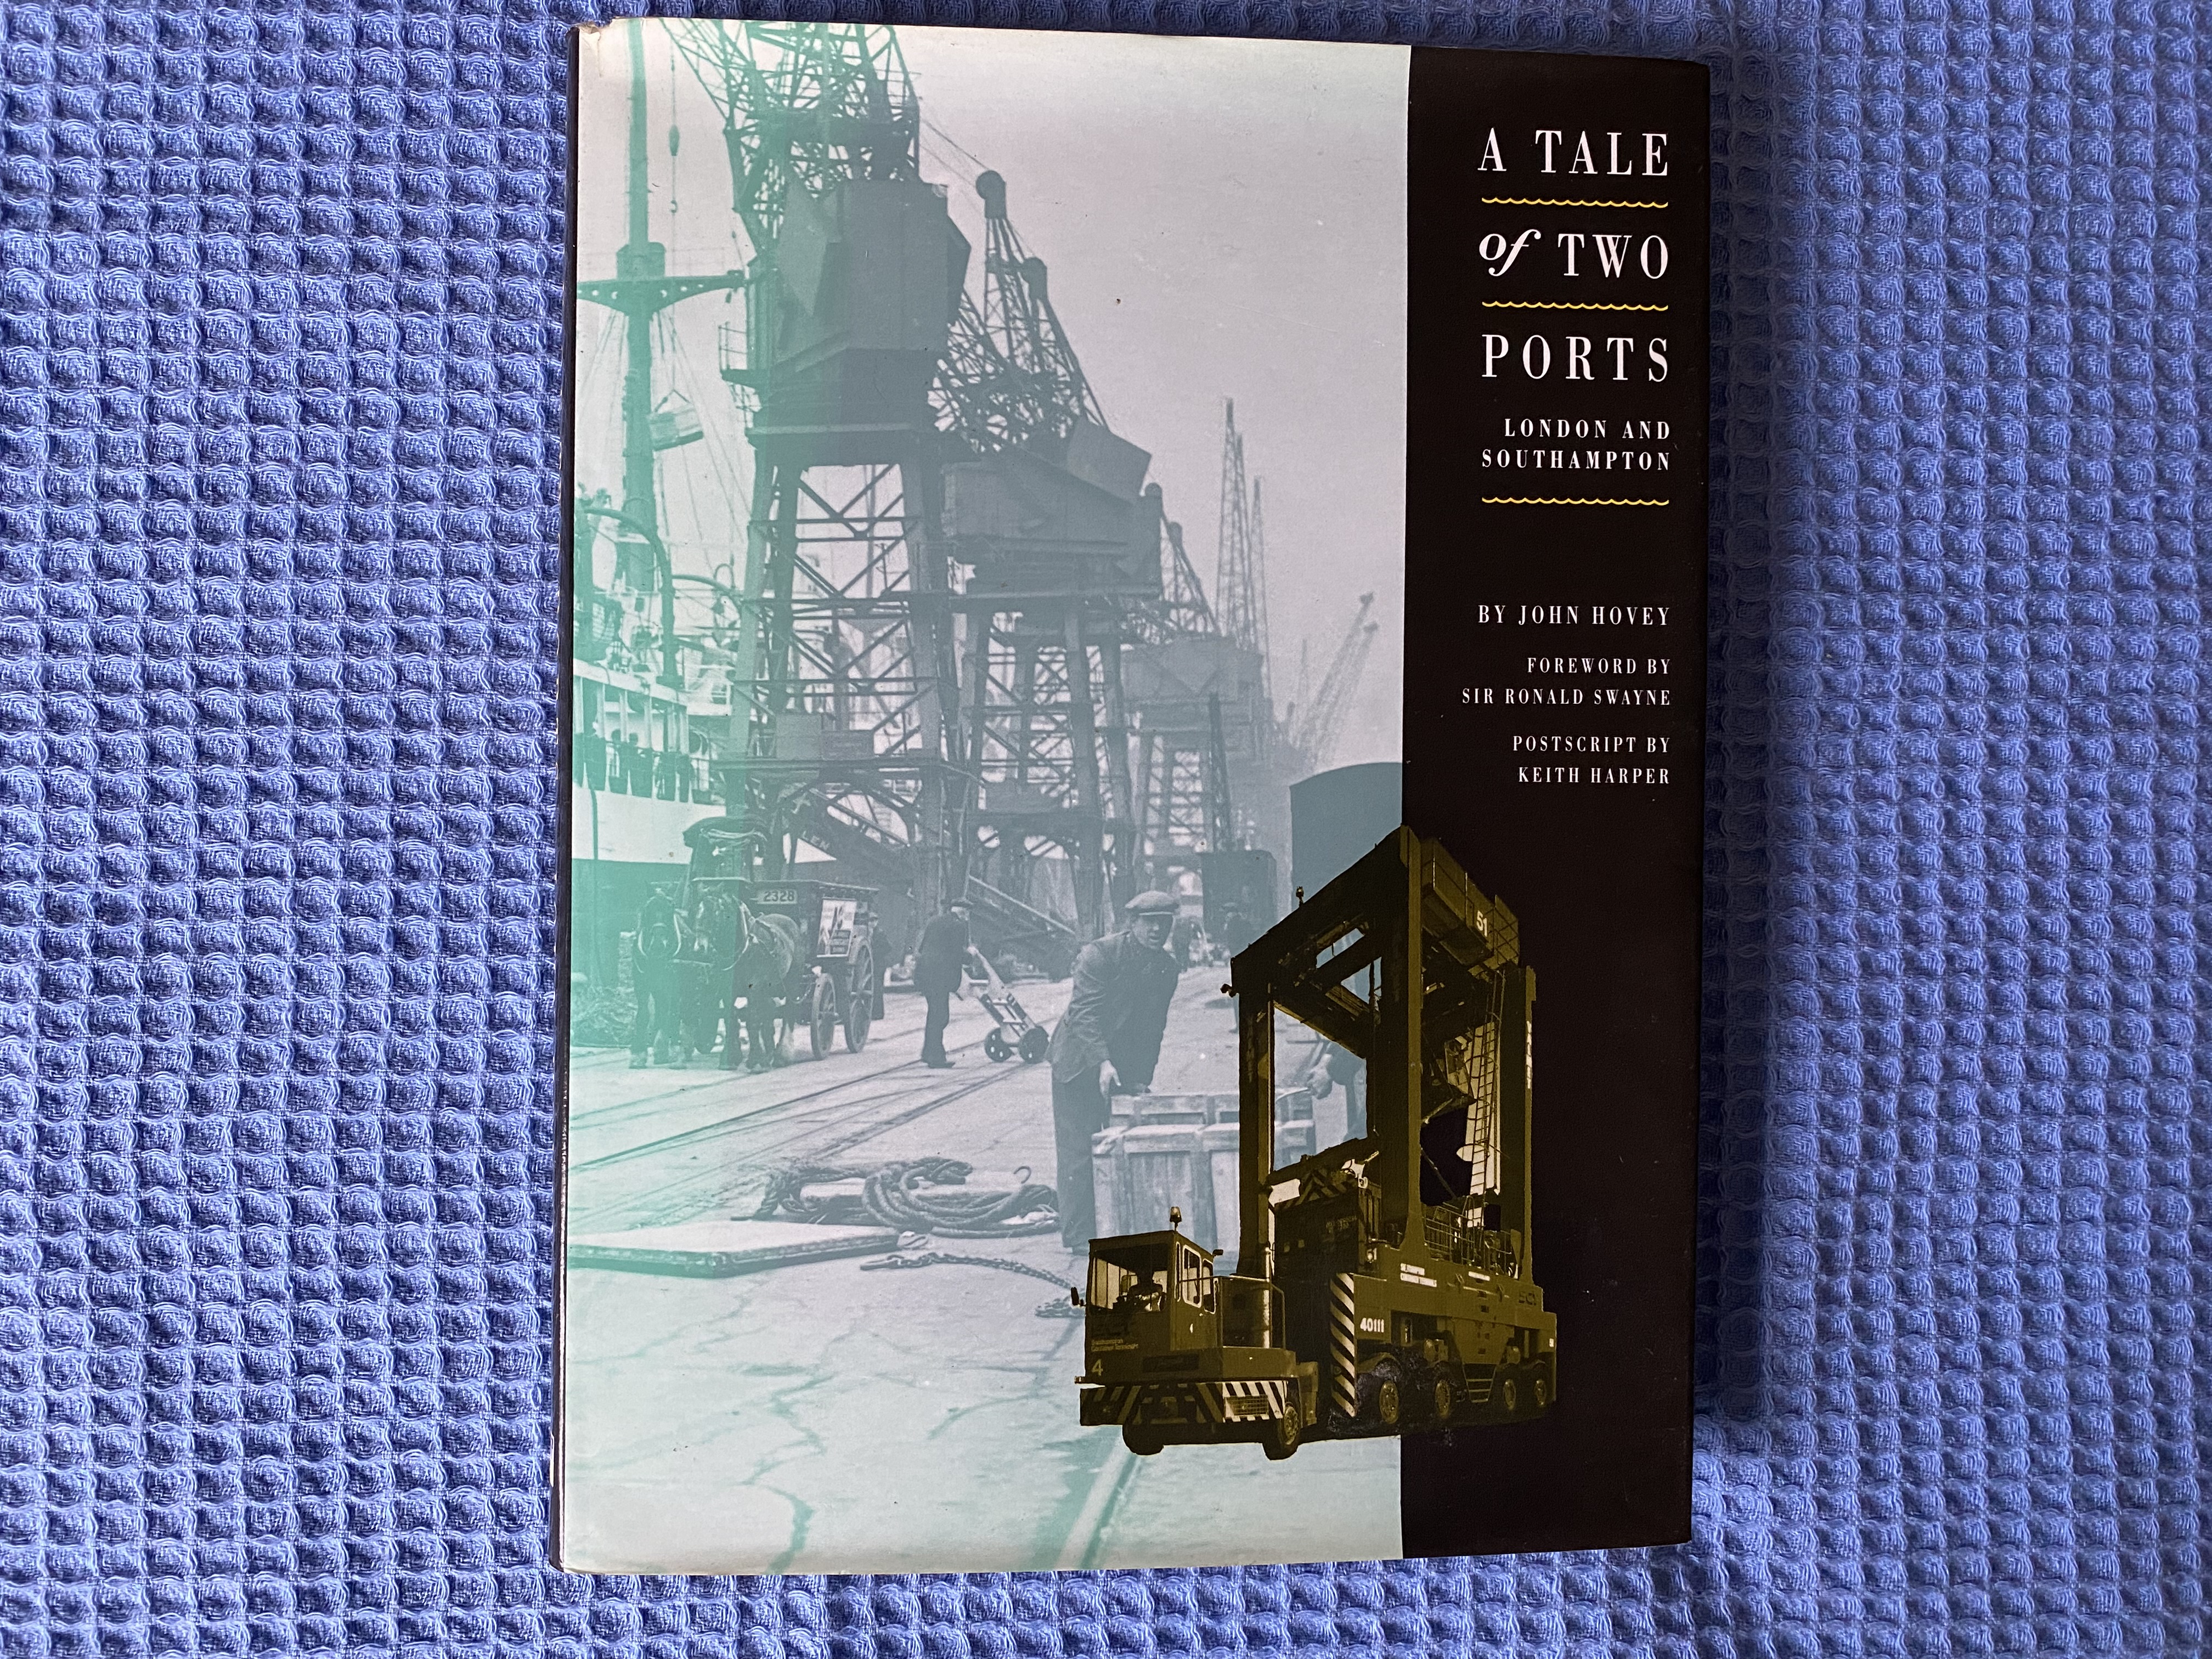 SUPERB BOOK ENTITLED A TALE OF TWO PORTS - LONDON AND SOUTHAMPTON BY JOHN HOVEY